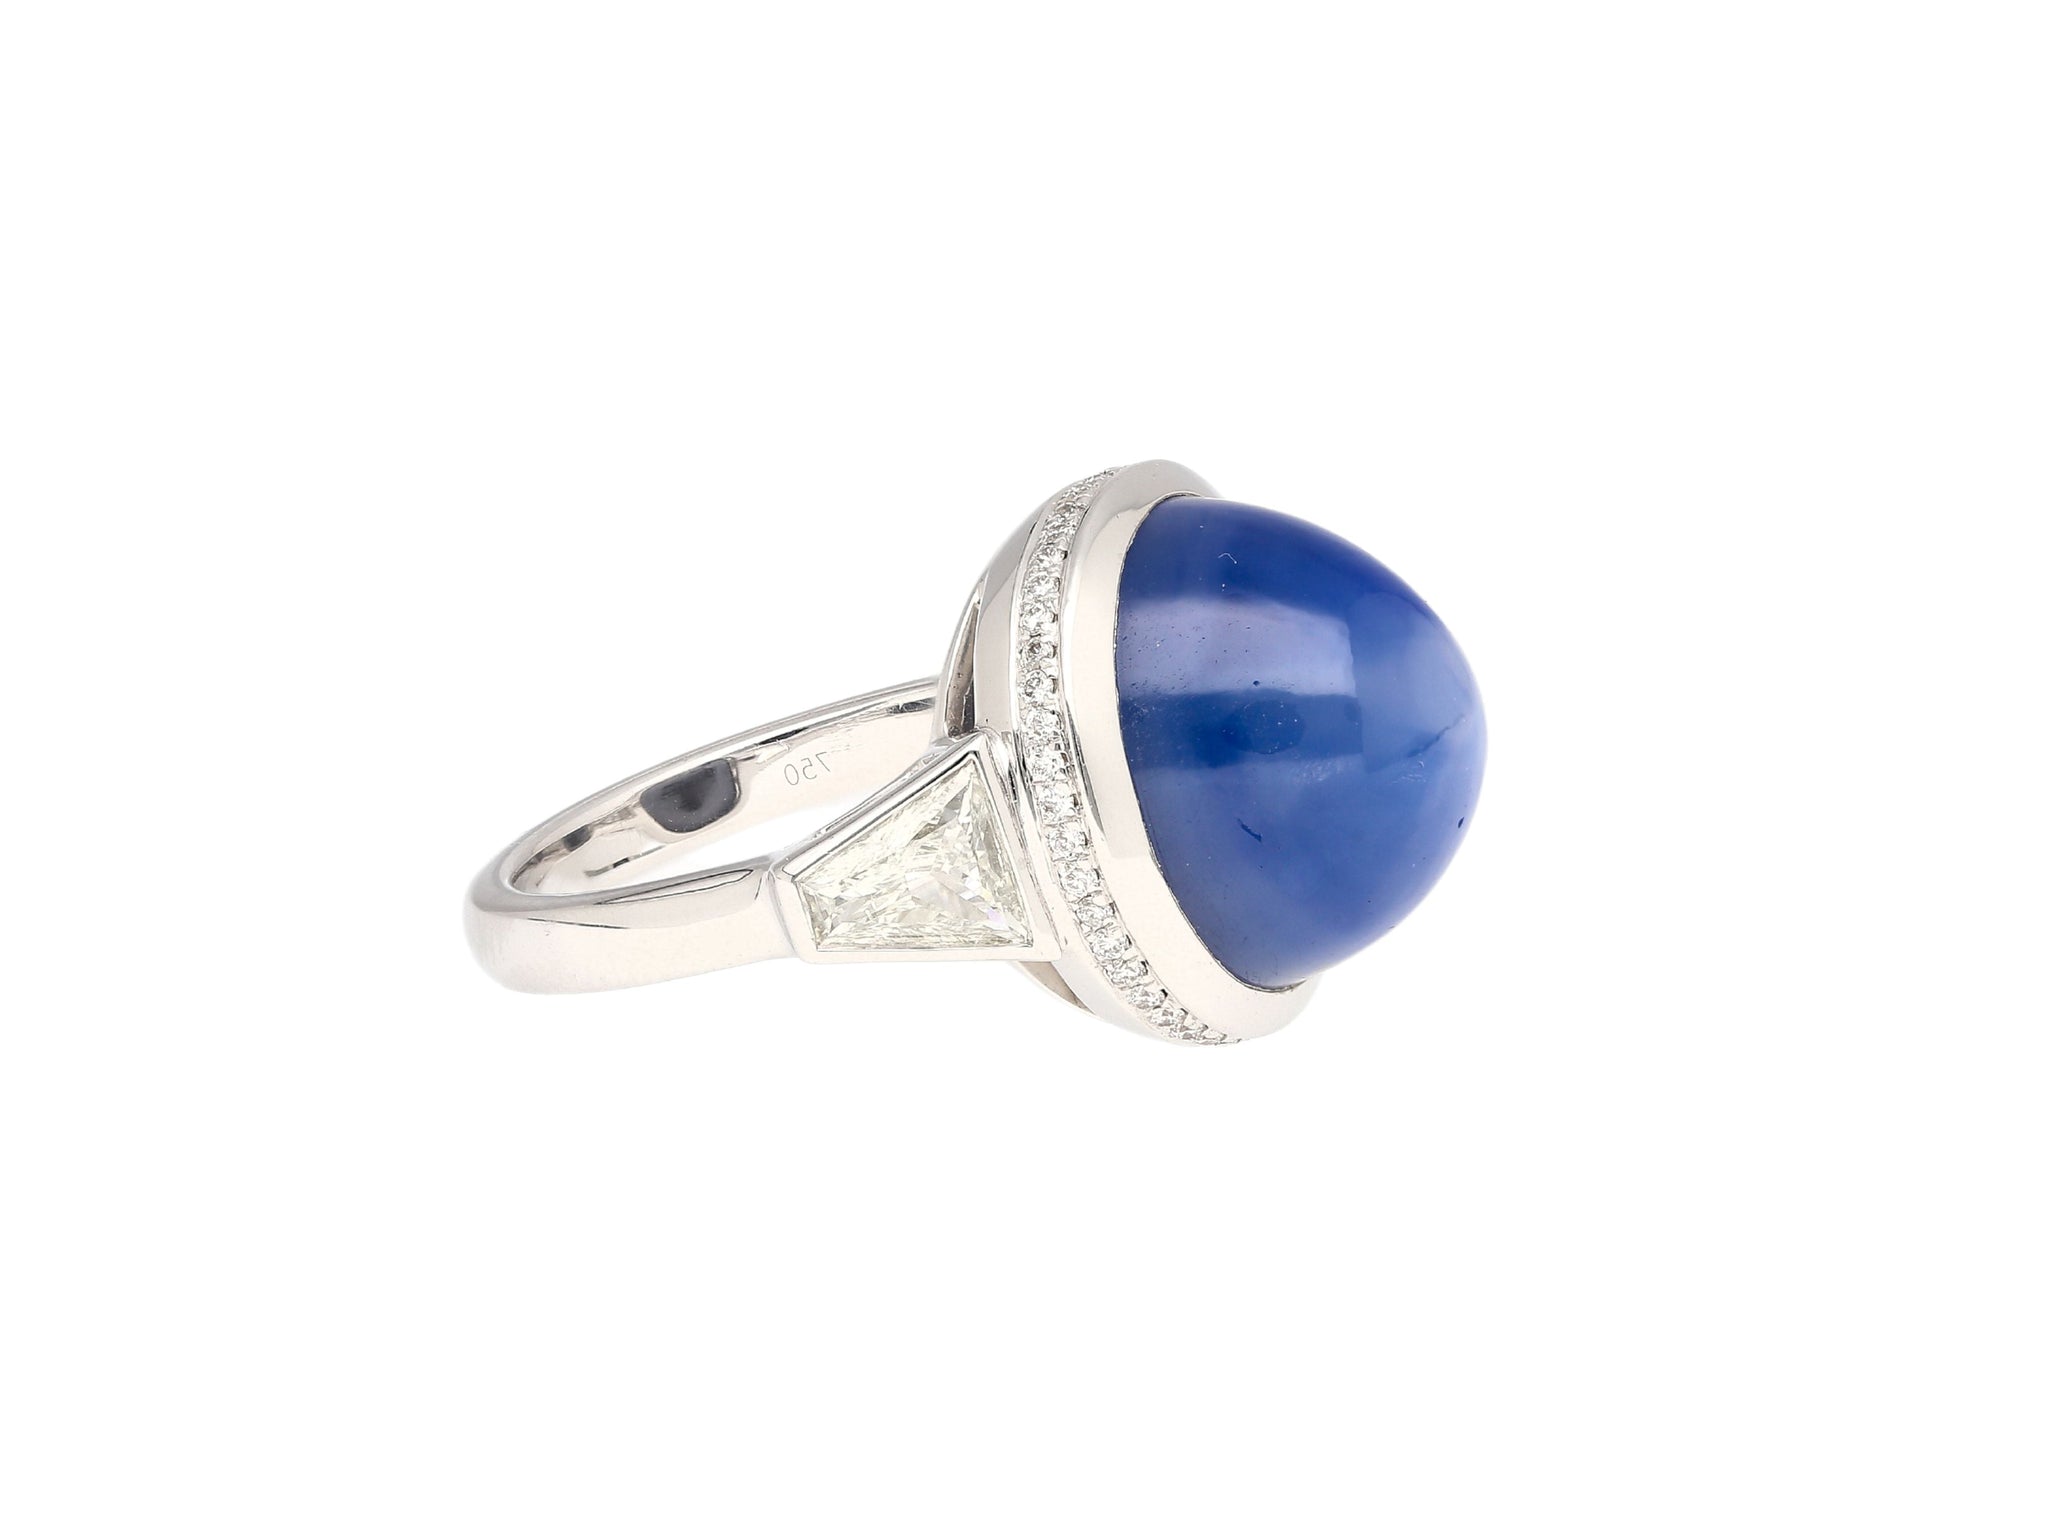 Buy Blue Star Sapphire Ring, 925 Sterling Silver ,6 Rays Star Sapphire Ring,  Blue Lindy Star Sapphire Ring, Anniversary Ring, Women Gifts Ring. Online  in India - Etsy